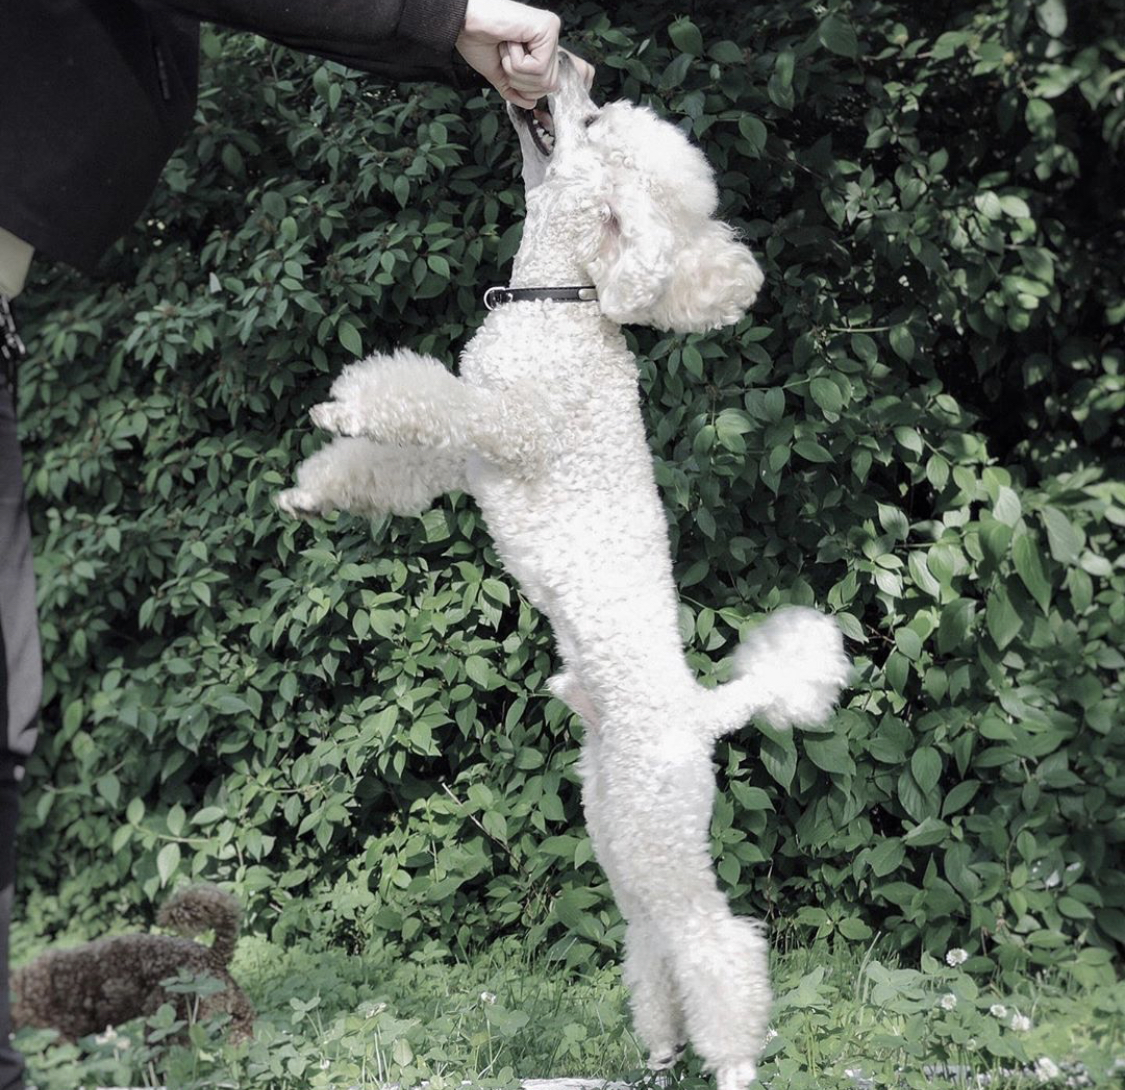 A Poodle getting a treat from the hand of a person